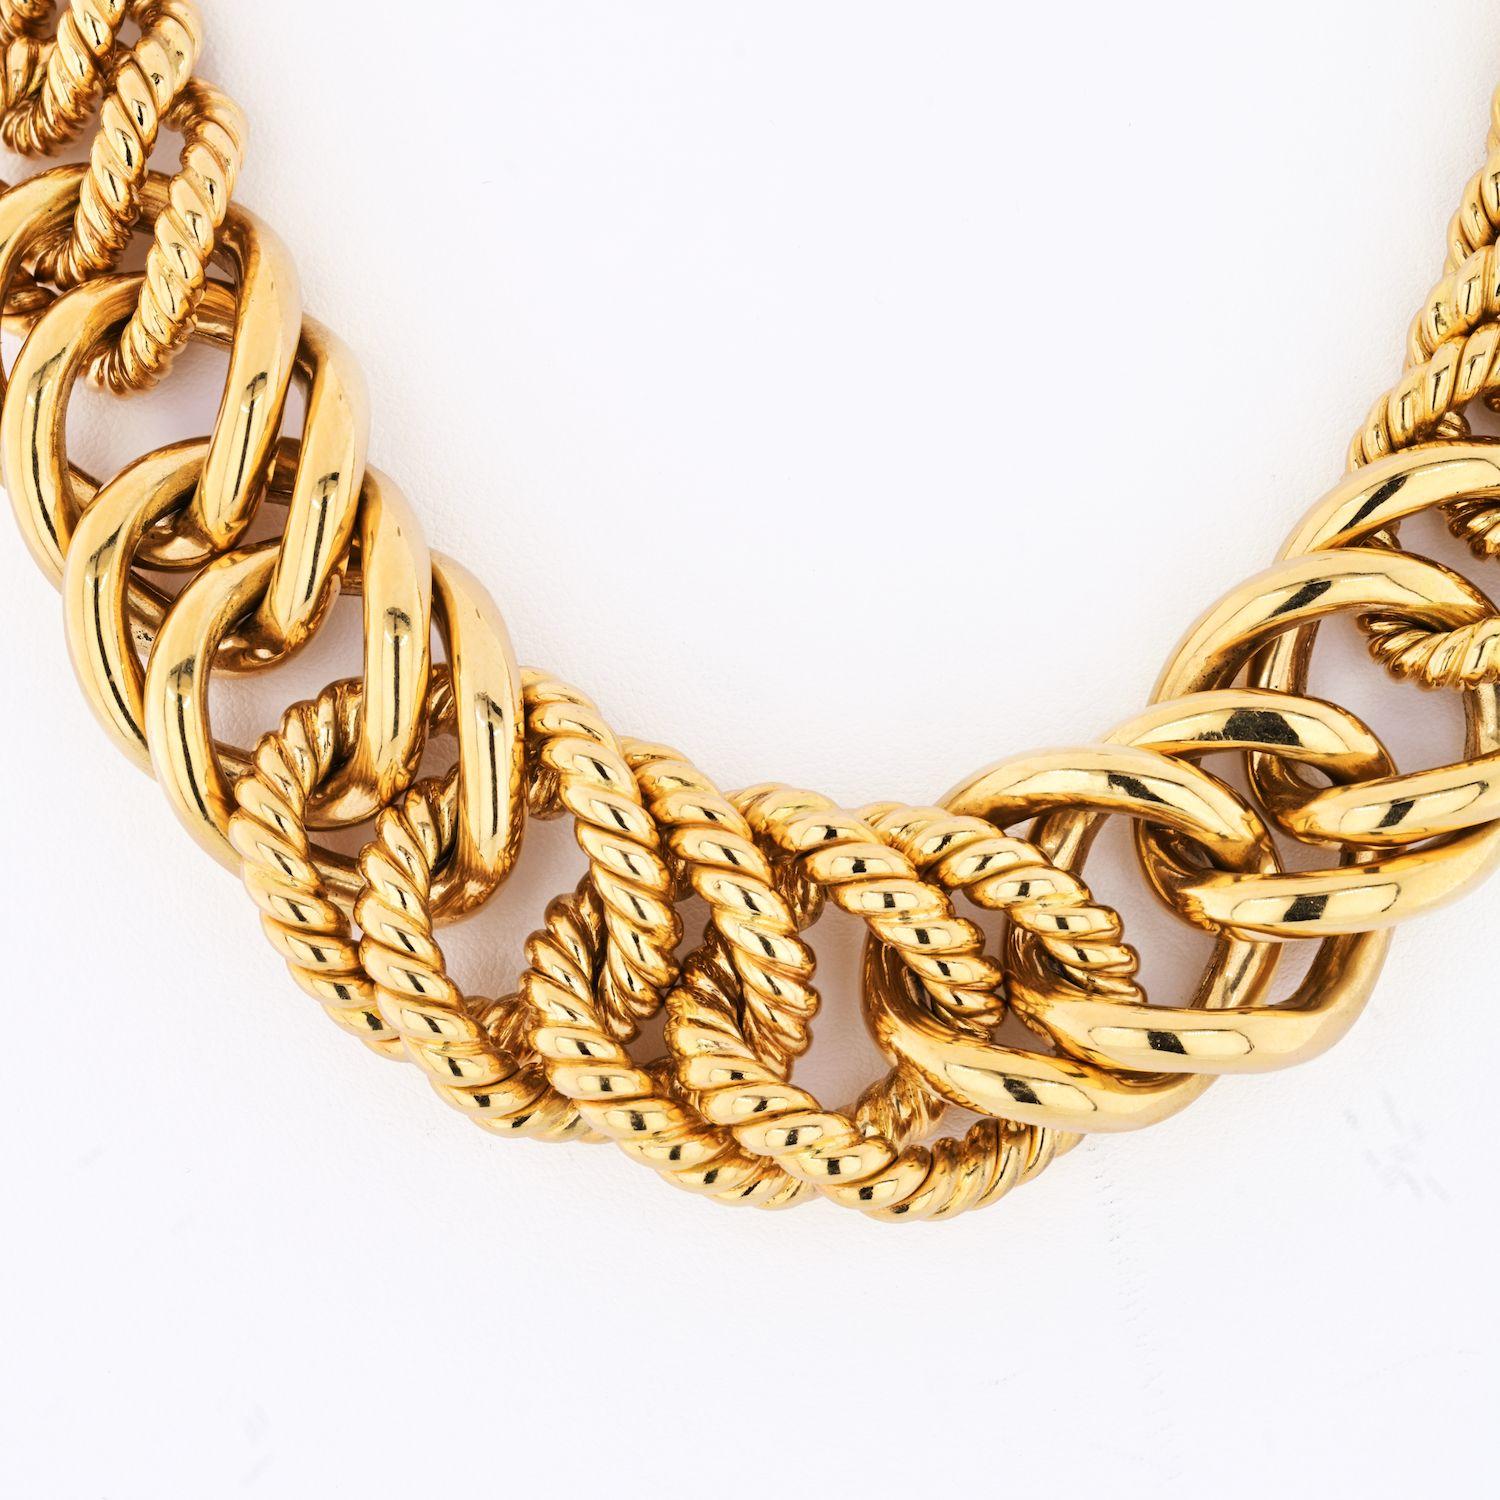 This beautiful, super rare necklace by Verdura in 18K yellow gold crafted like a series of interlocking links that gradually enlarge towards the front. 

18 inches. 

Light oversized link chain necklace.